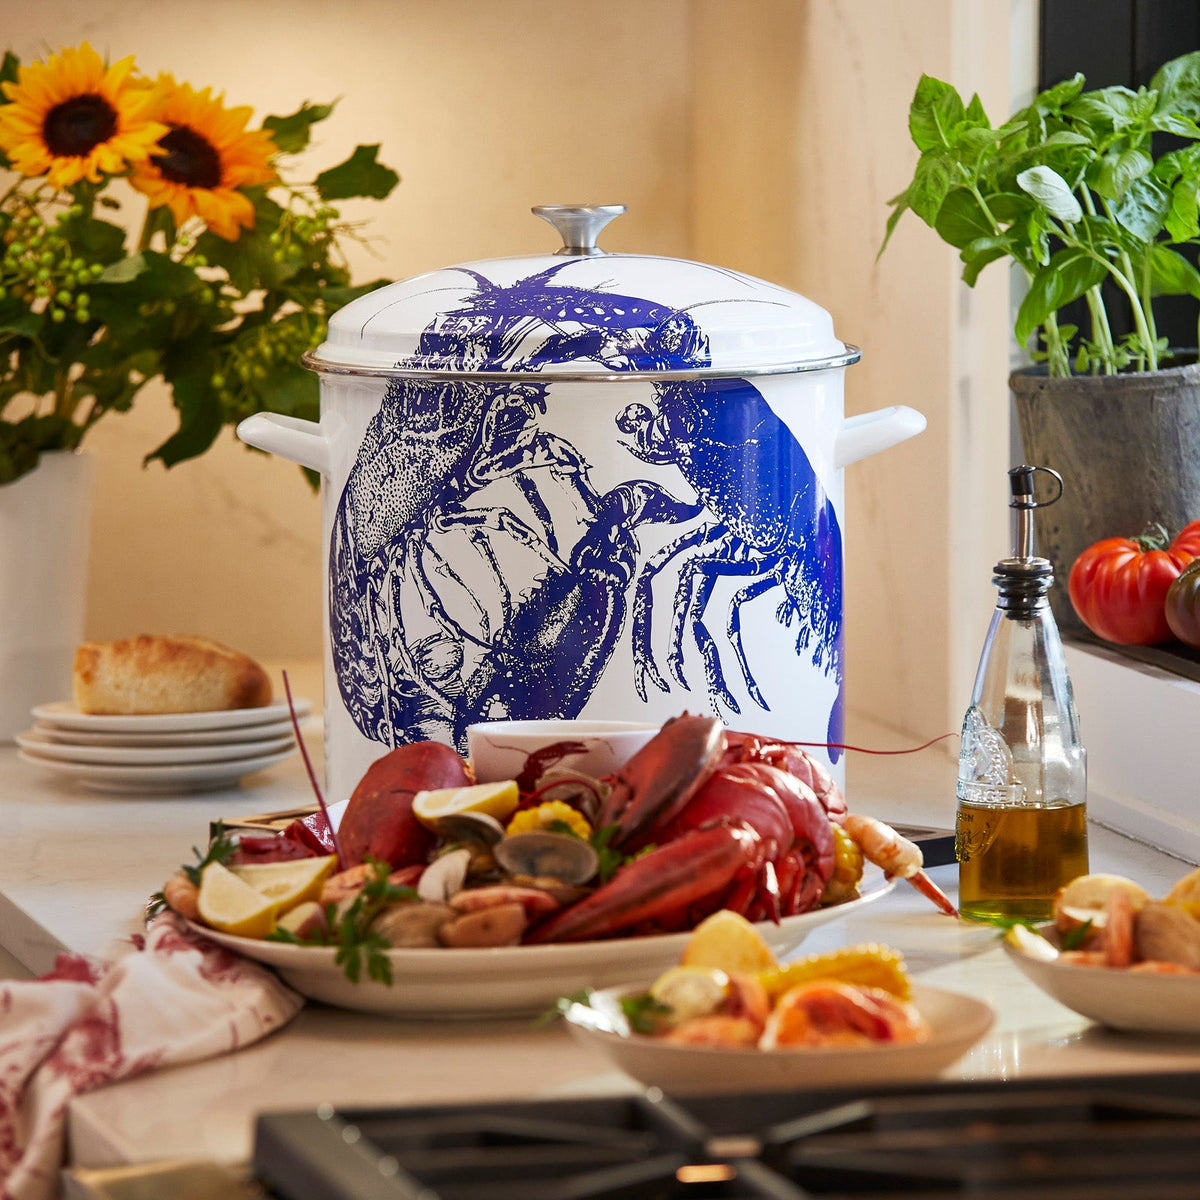 A Caskata X Cuisinart Limited Edition Lobster 16 Qt. Enamel on Steel Stockpot, perfect for clambakes, rests on a kitchen counter.